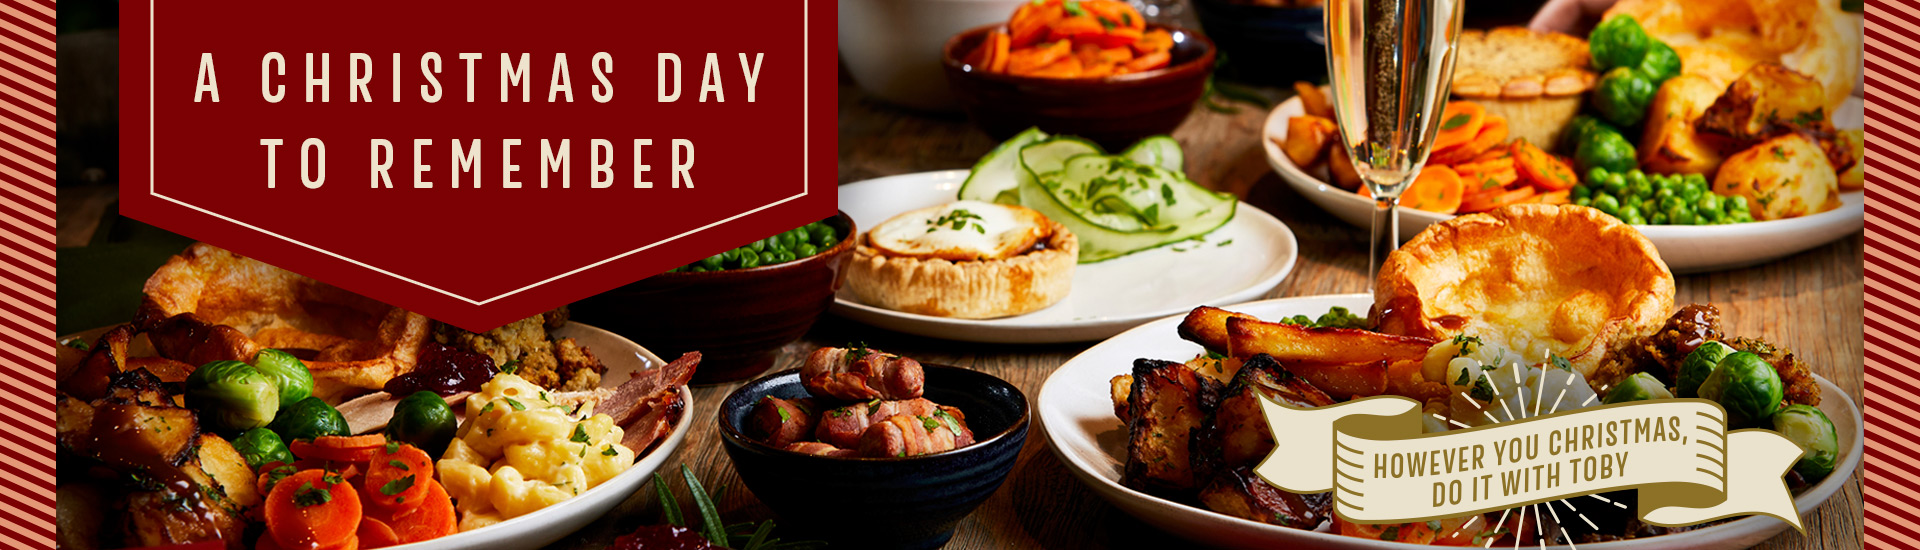 Christmas Day menu at Toby Carvery Lauriston Farm